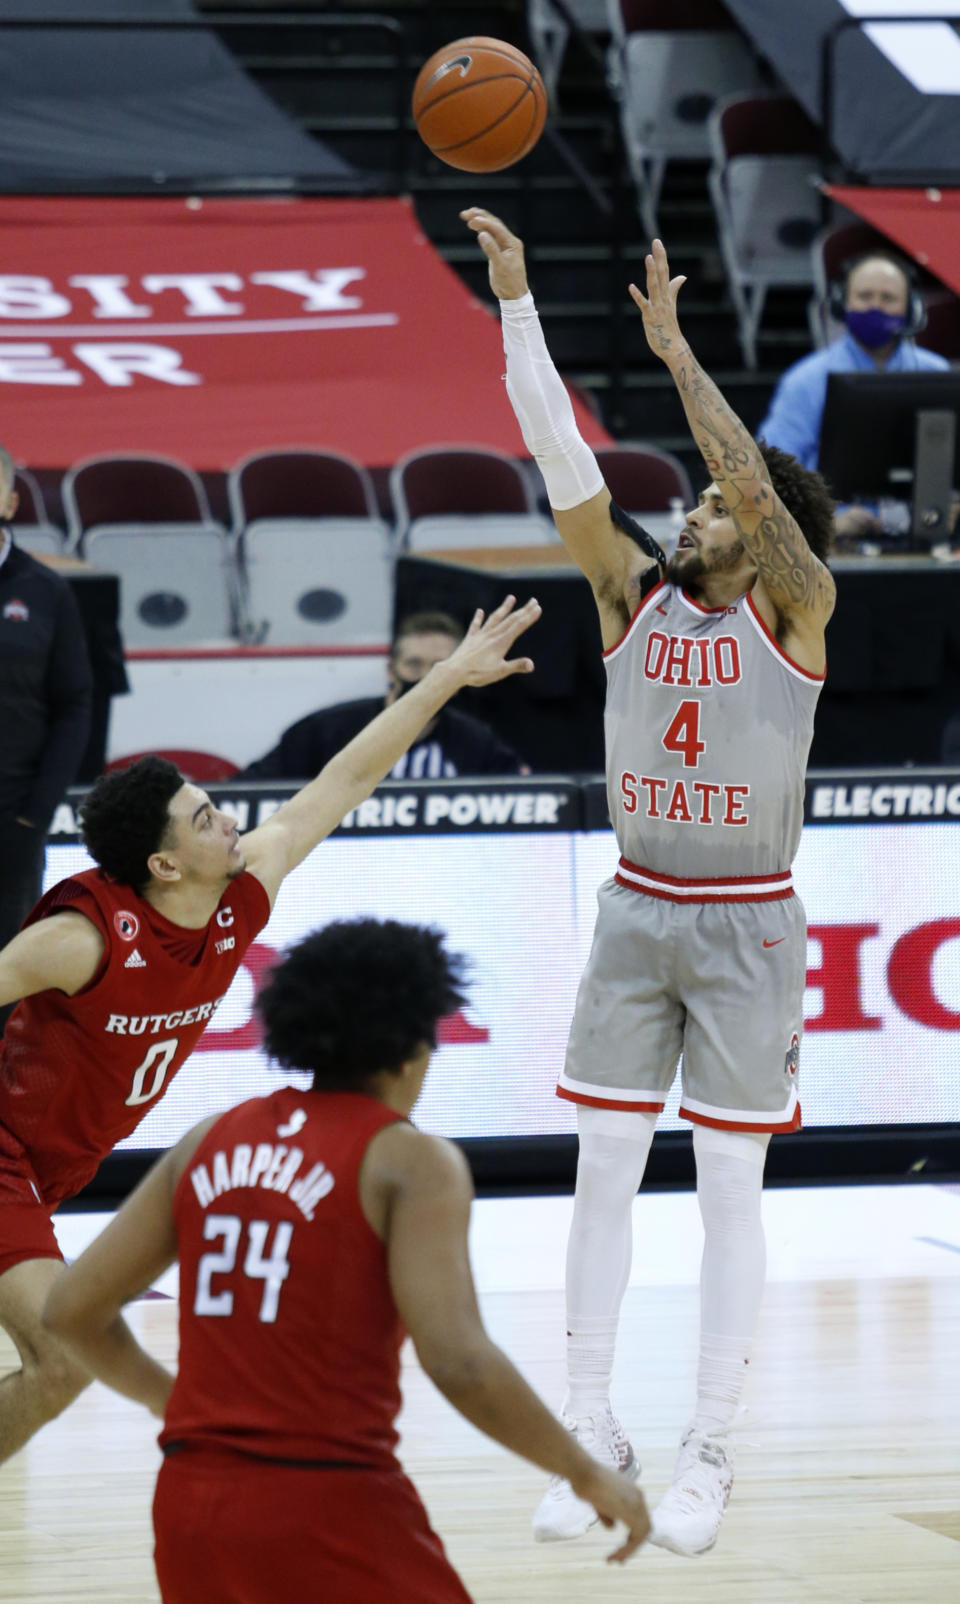 Ohio State guard Duane Washington shoots over Rutgers guard Geo Baker, left, and guard Ron Harper during the second half of an NCAA college basketball game in Columbus, Ohio, Wednesday, Dec. 23, 2020. (AP Photo/Paul Vernon)